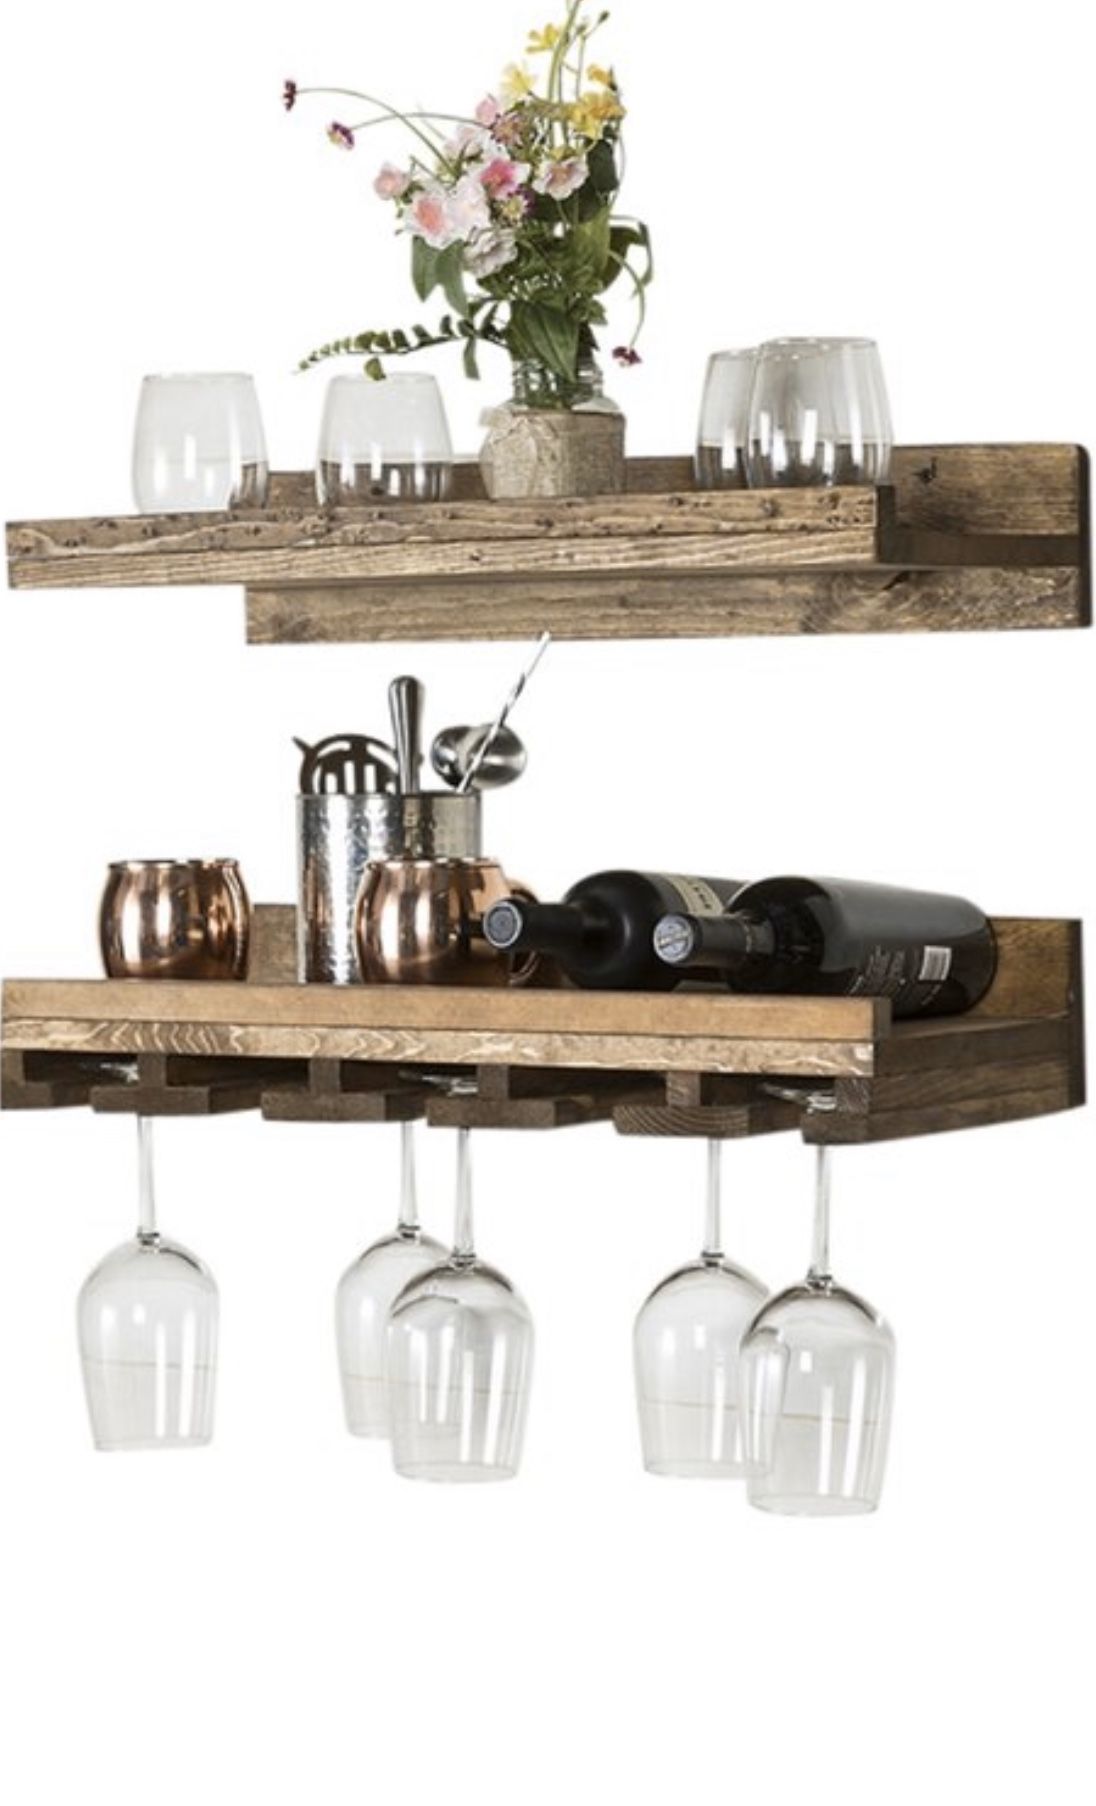 Wine glass shelves (selling together)